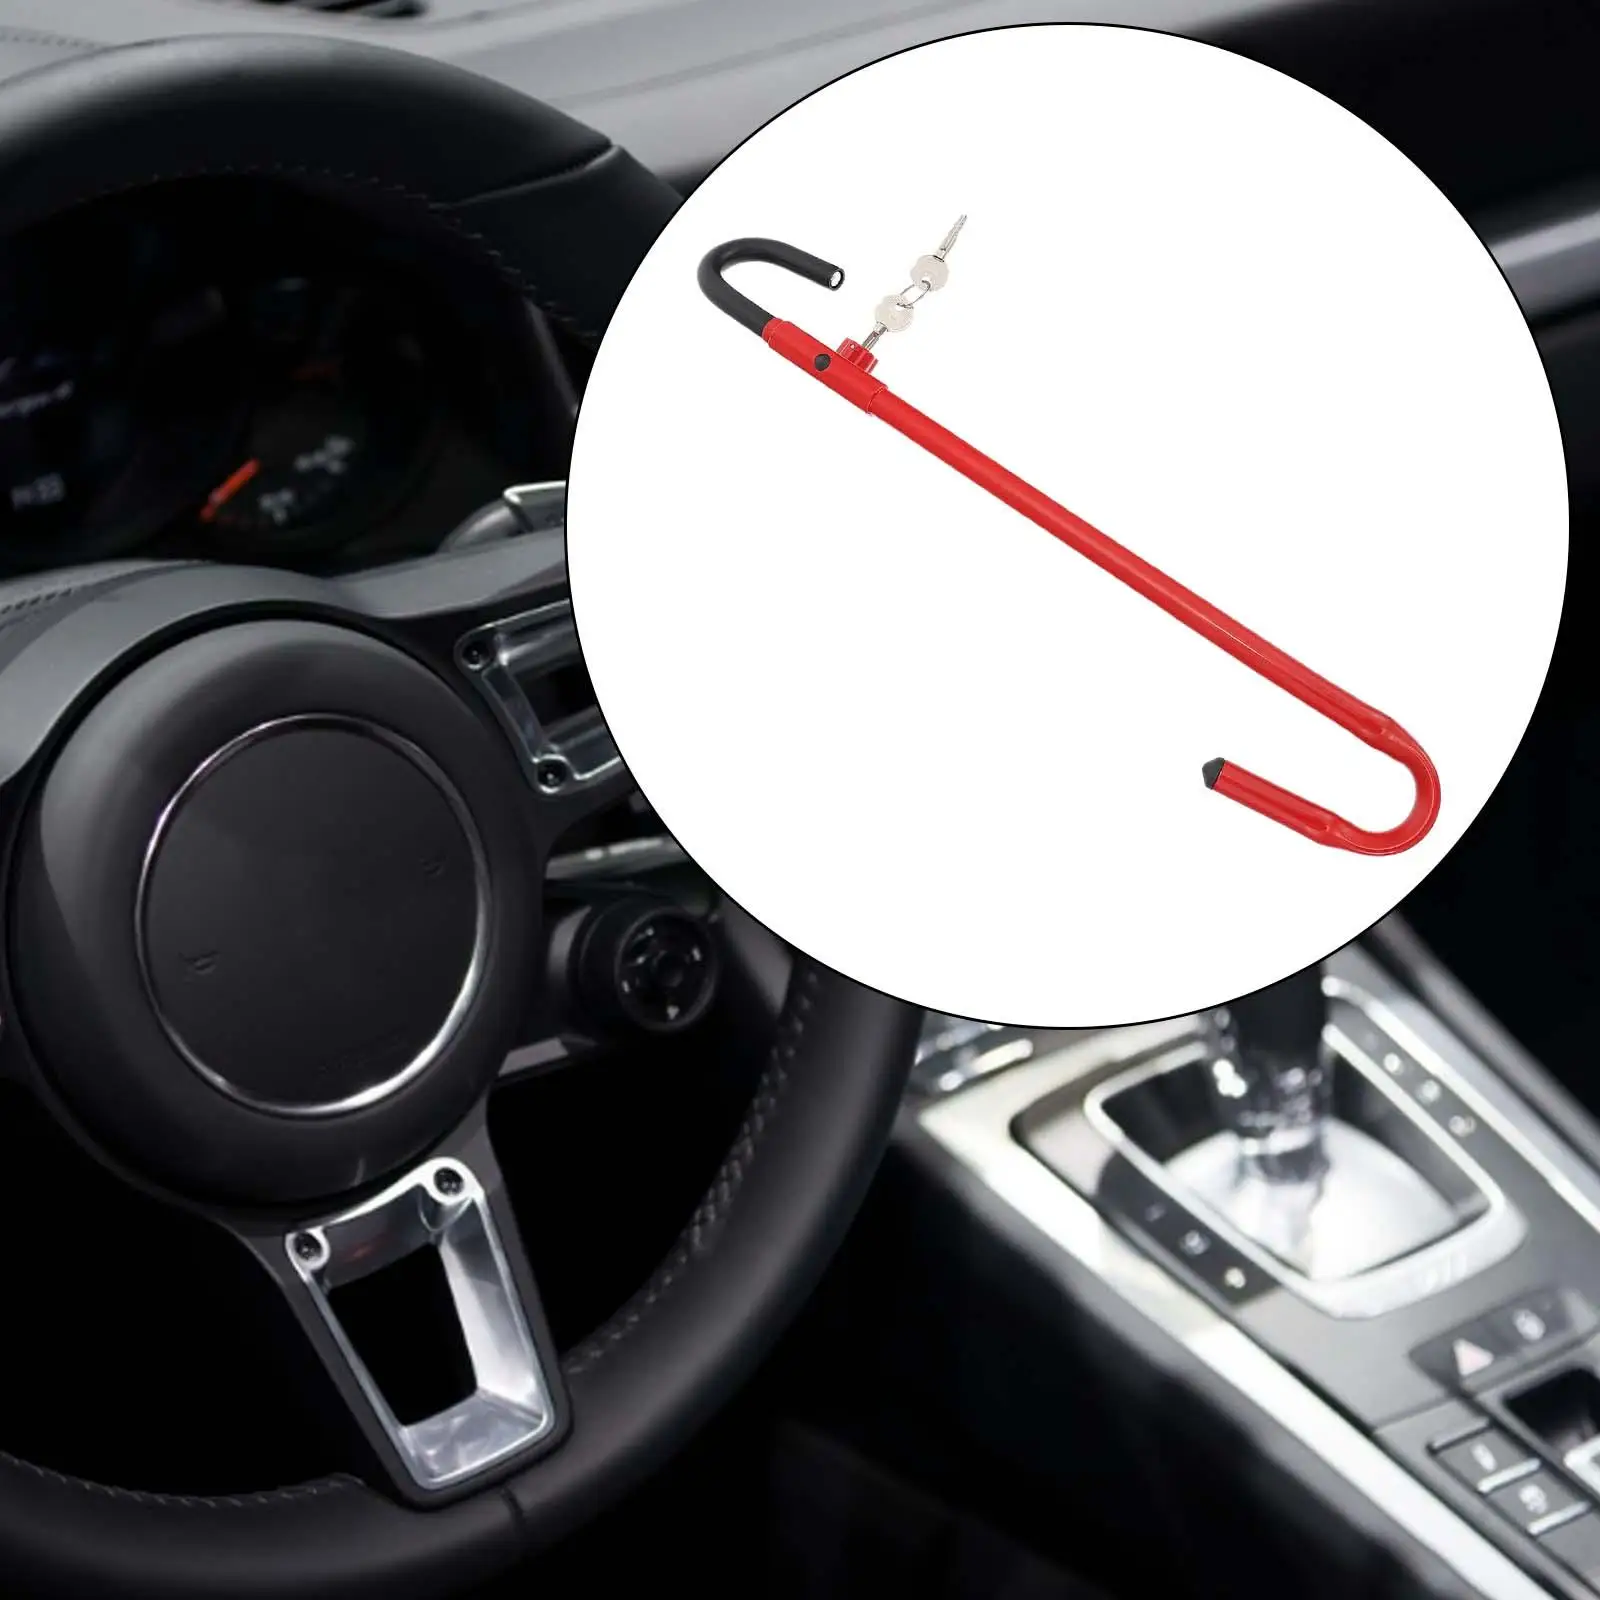 Car Steering Wheel to Brake Pedal Lock Accessory for Automobile SUV Car